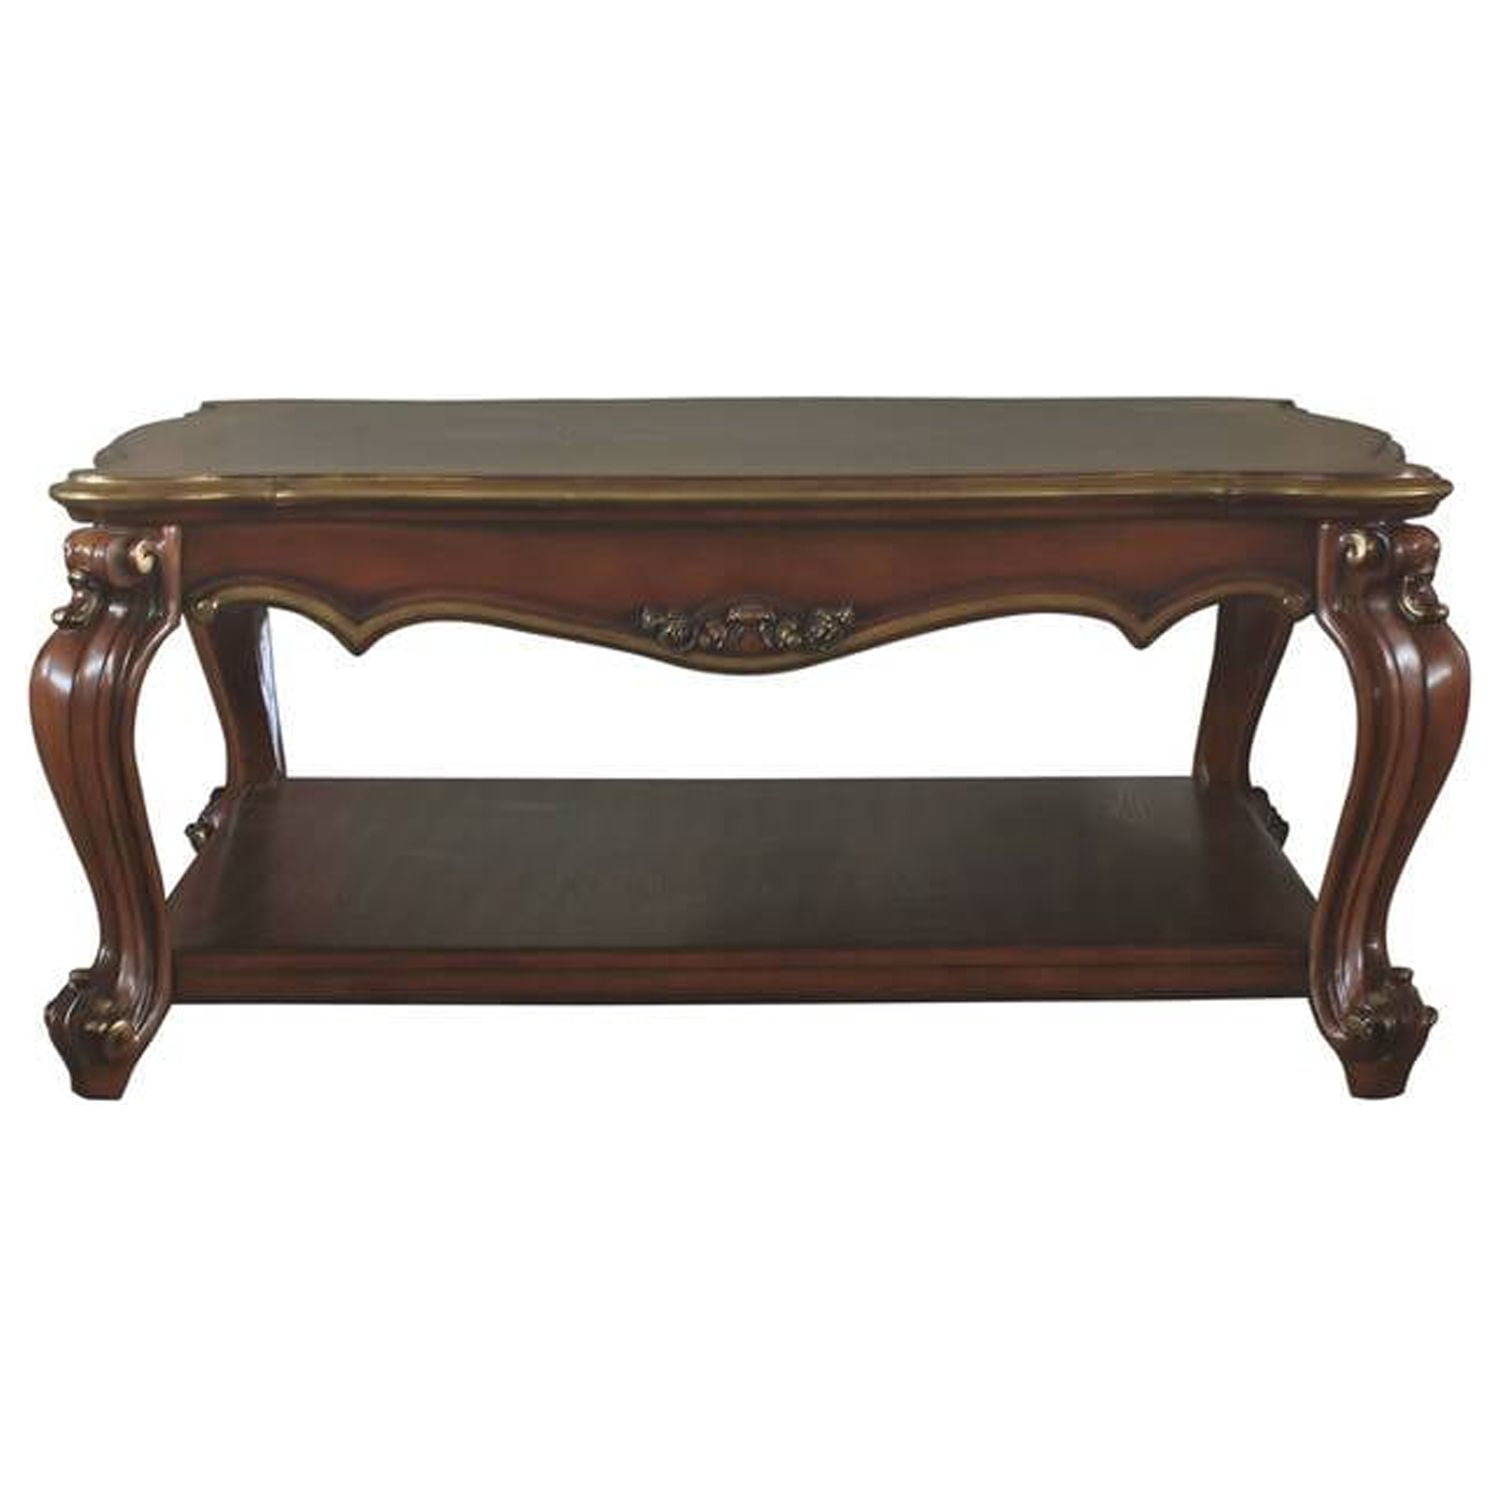 Picture of ACME Furniture 88220 Coffee Table, Vintage Cherry Oak - 21 x 48 x 84 in.